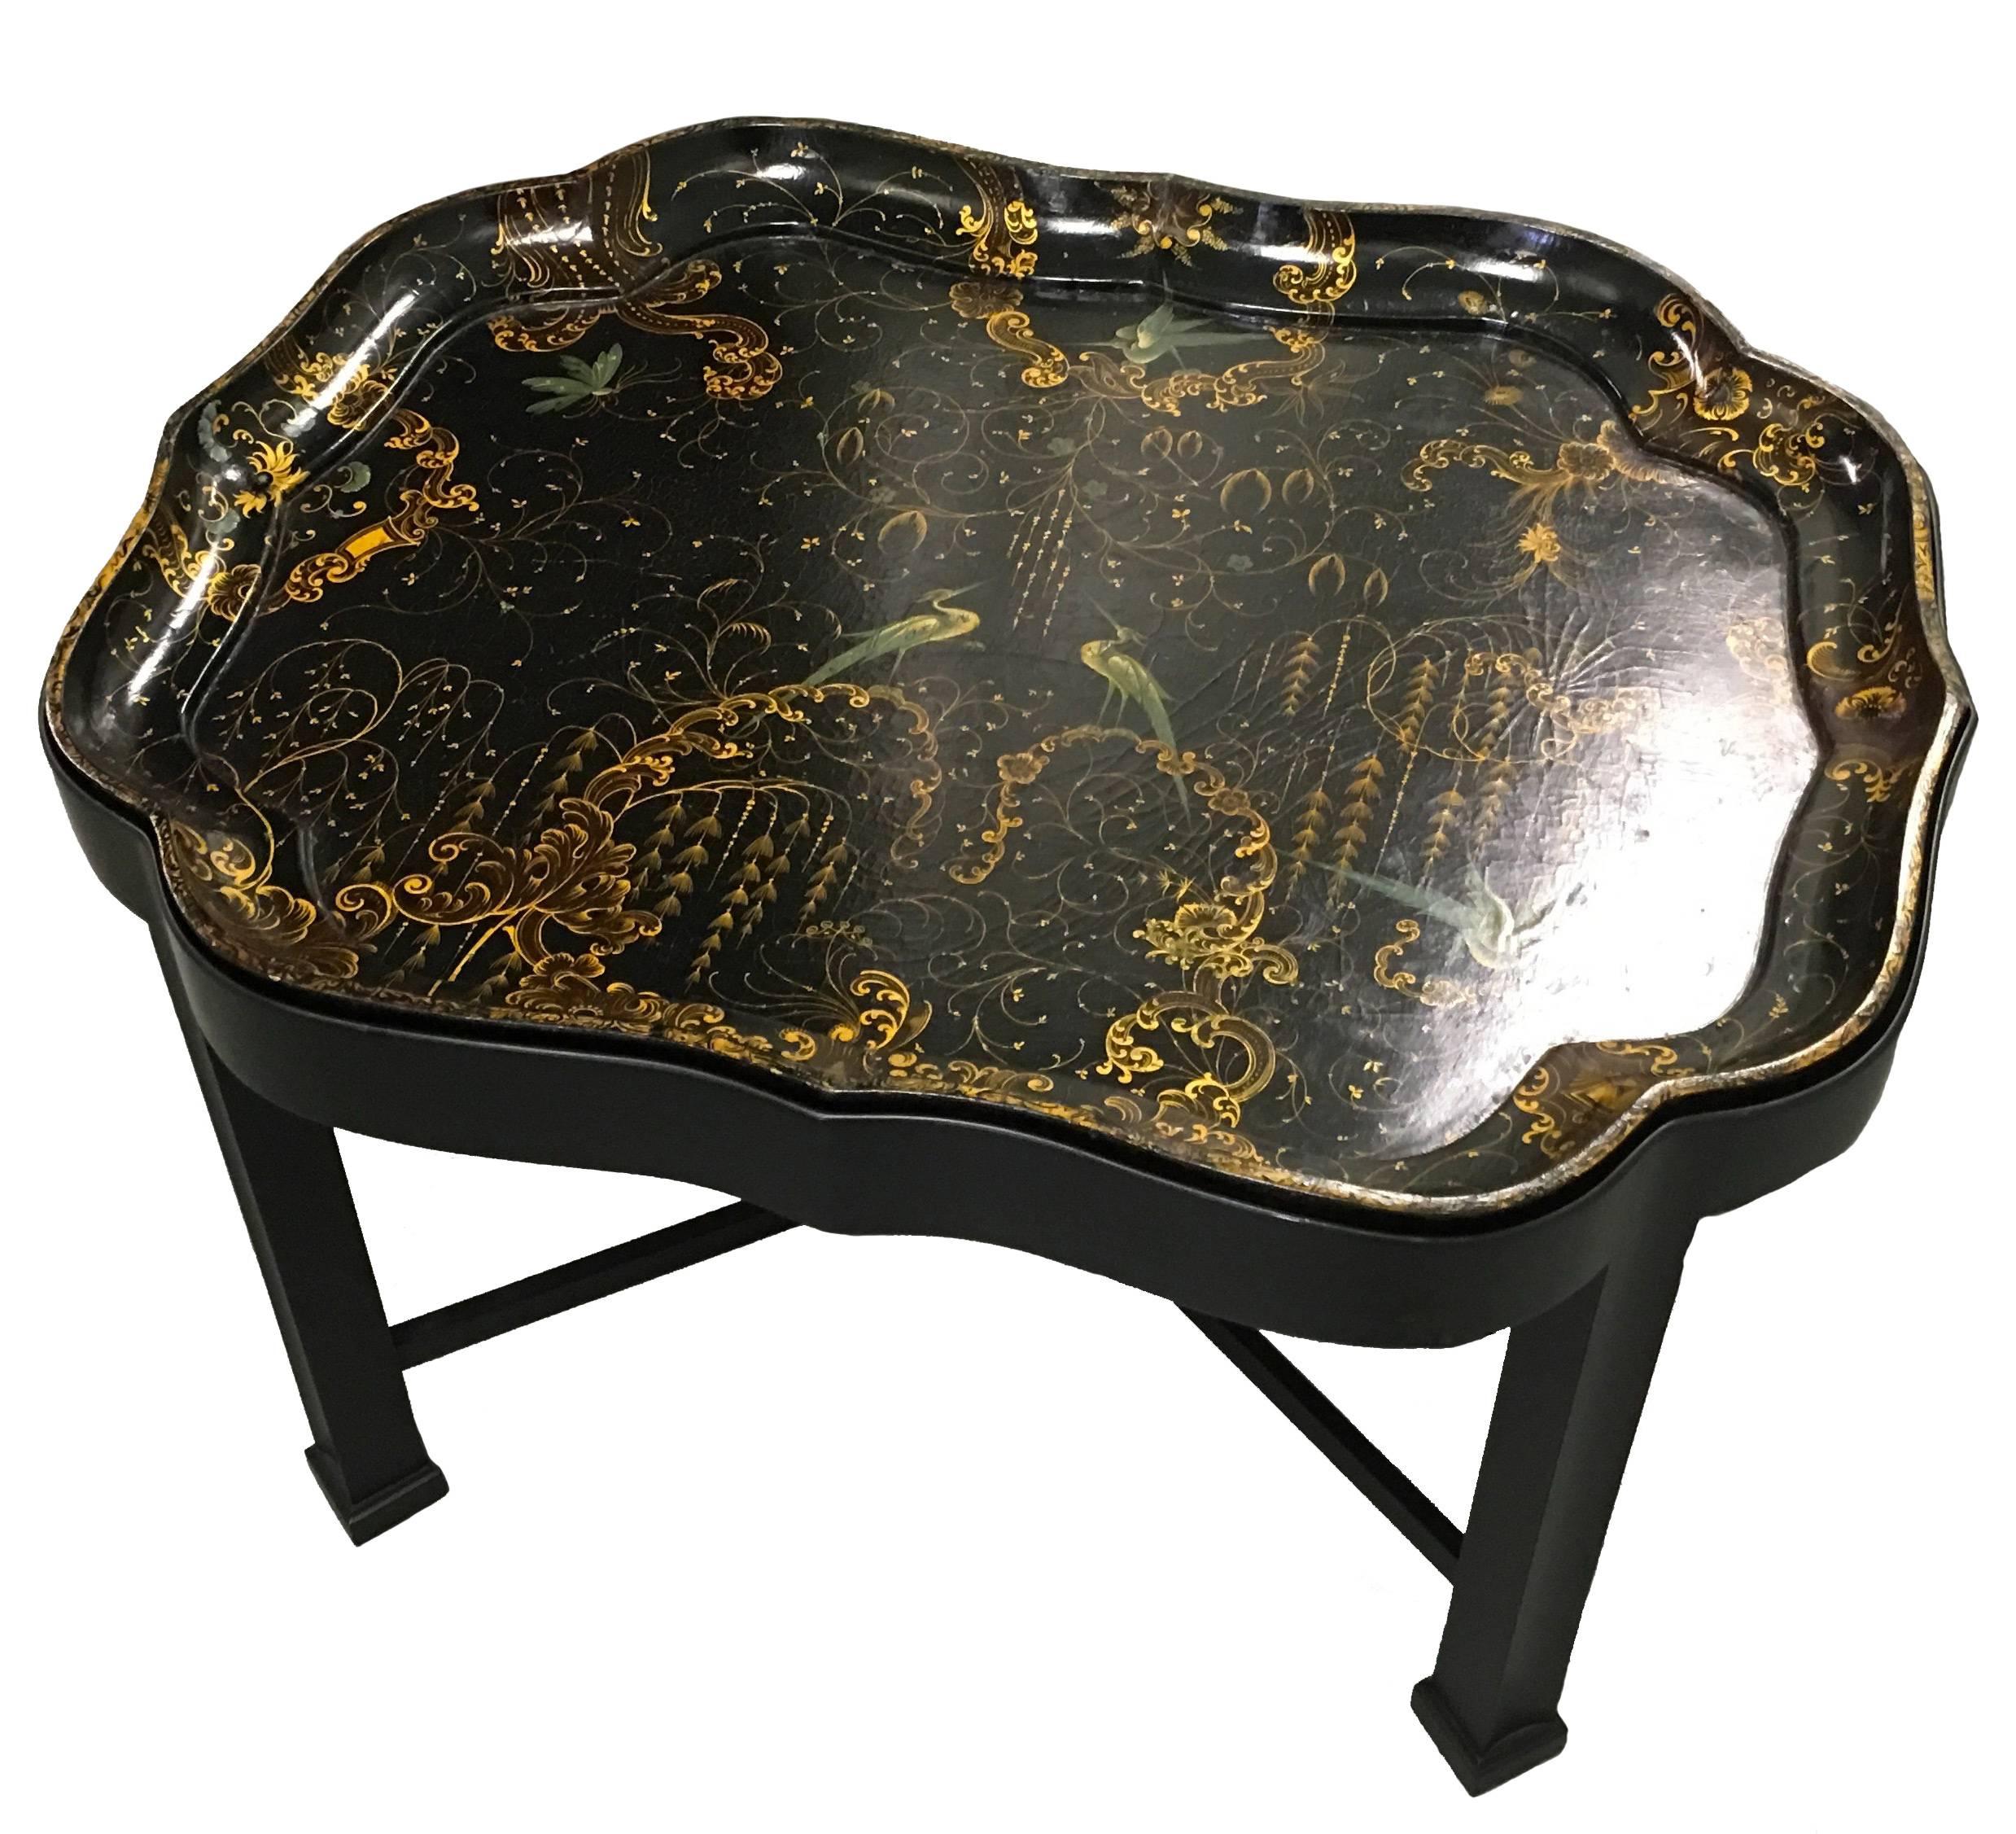 English Regency papier mâché tray table in the style of Henry Clay. Peacock motif polychrome scene with gilt detailing. Custom stand of a later period in black lacquered wood.